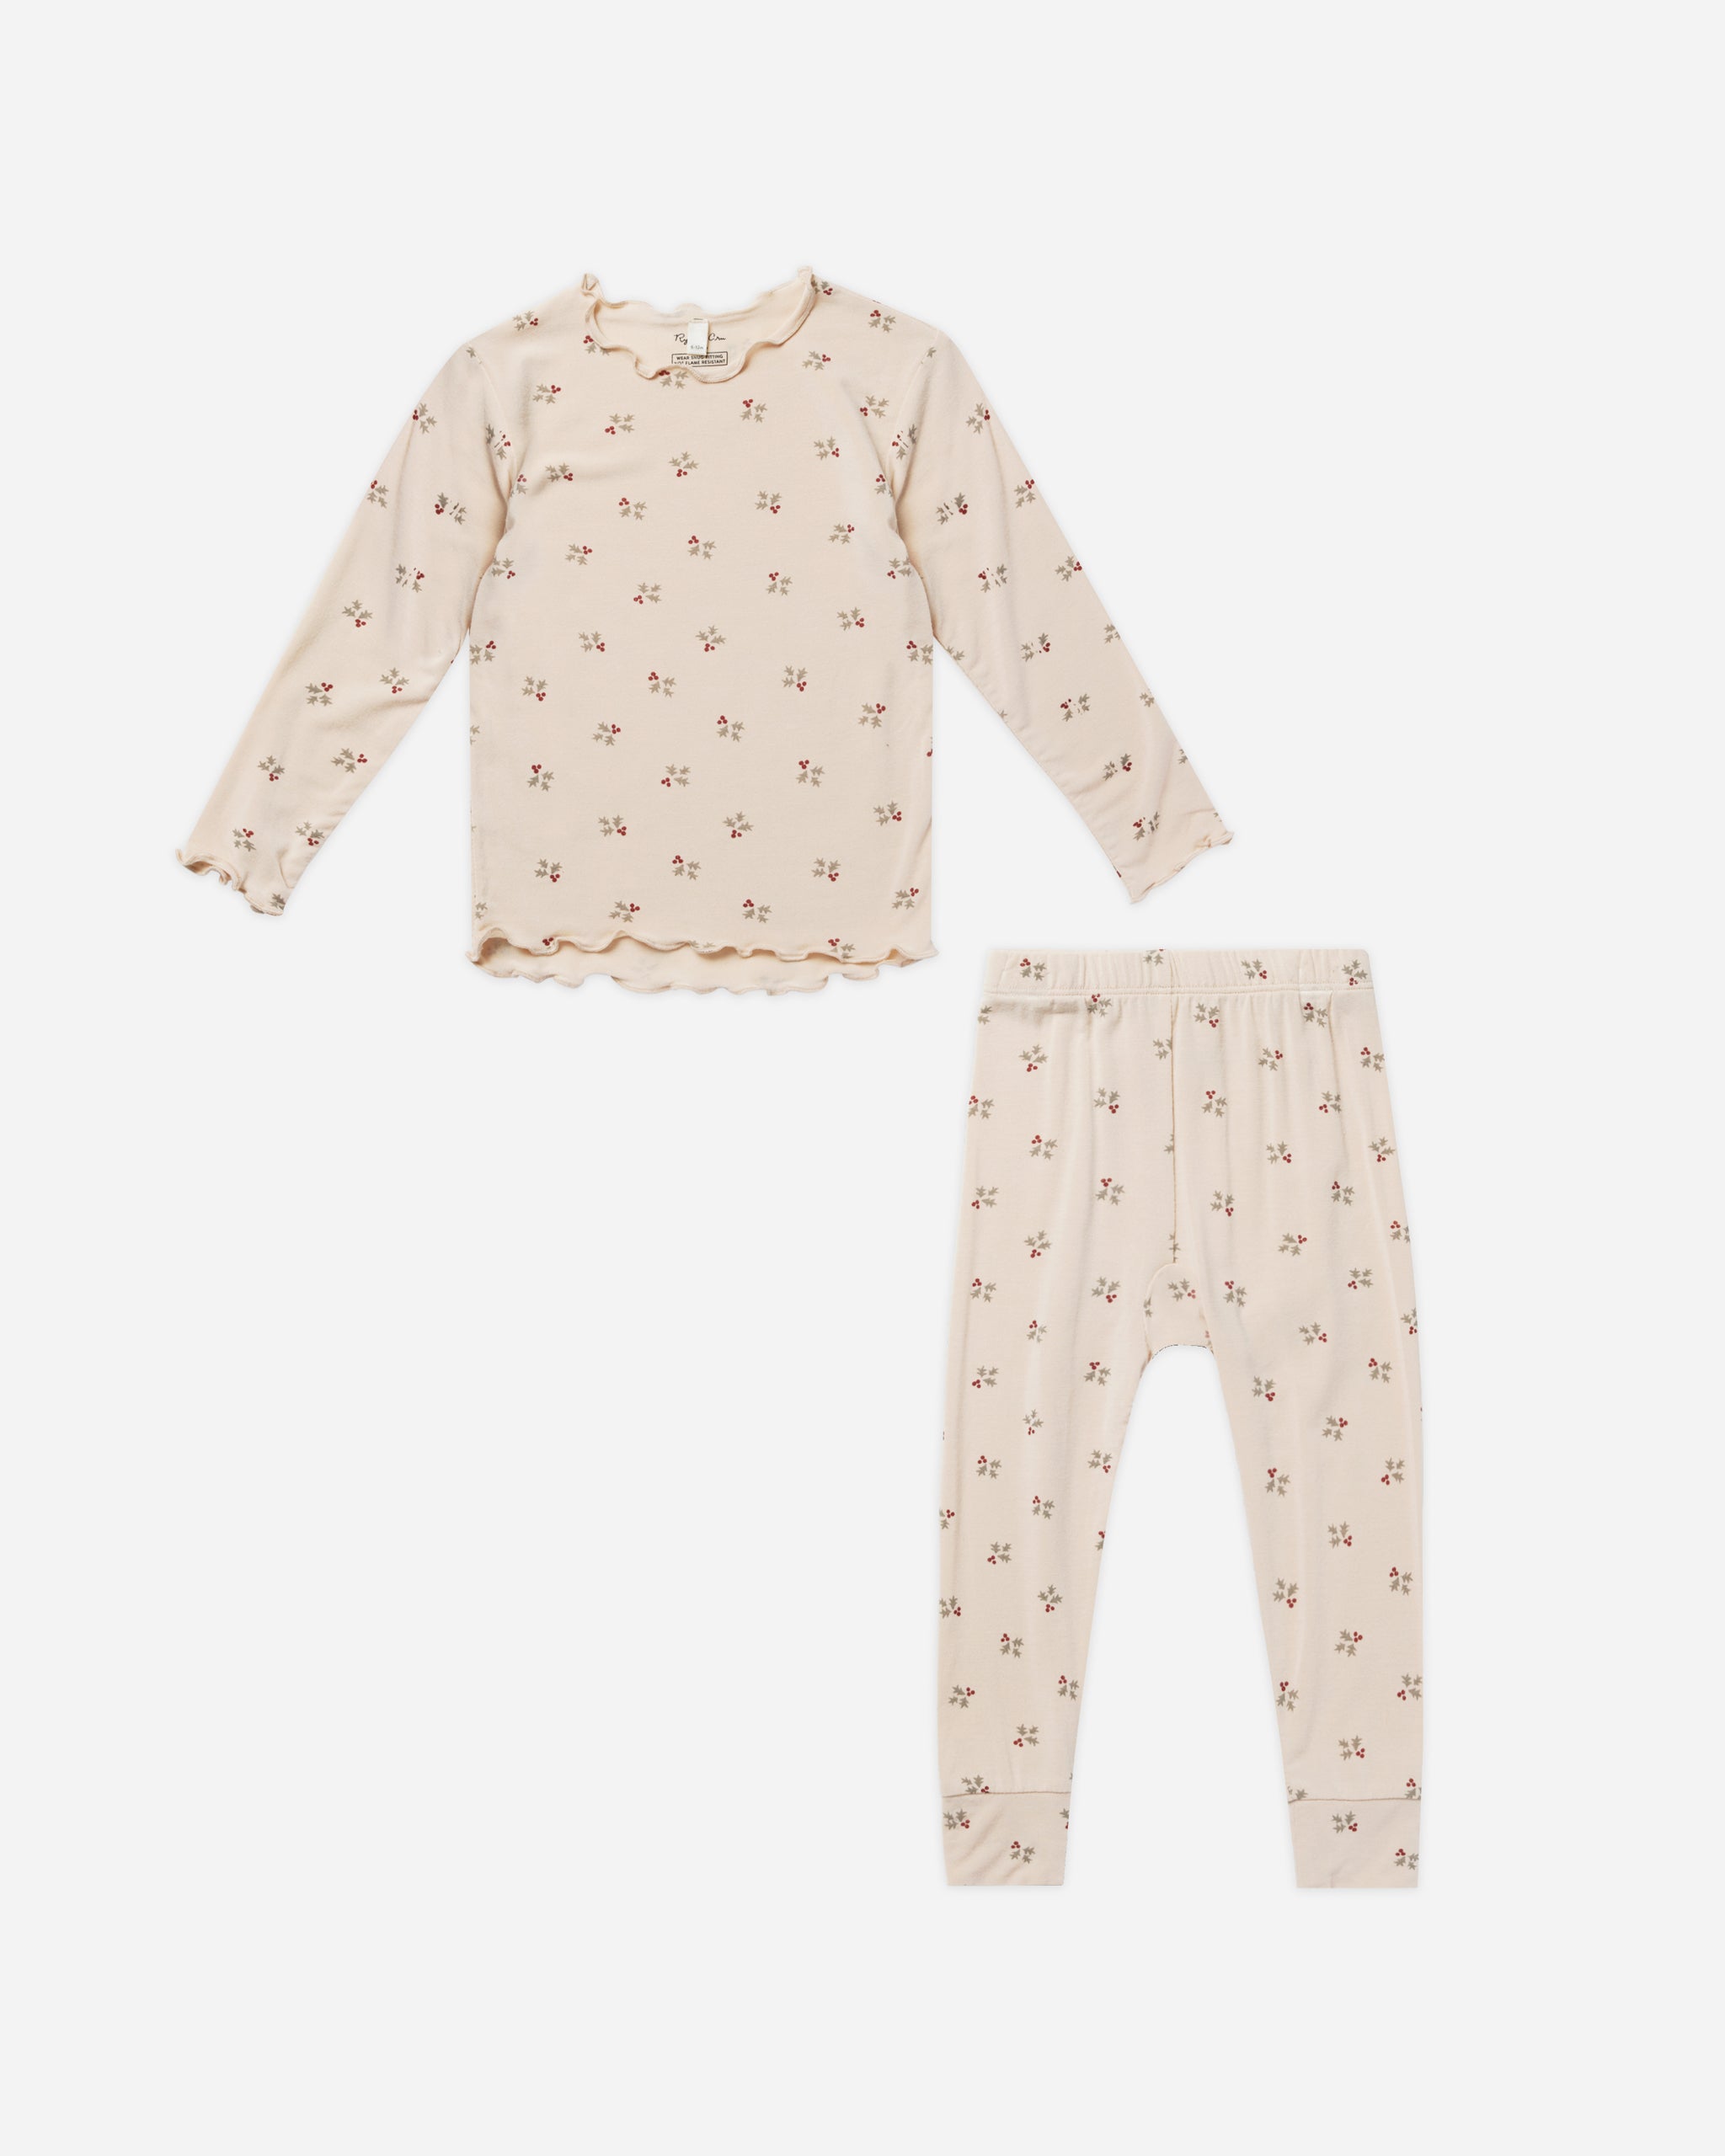 Modal Pajama Set || Holly Berry - Rylee + Cru | Kids Clothes | Trendy Baby Clothes | Modern Infant Outfits |